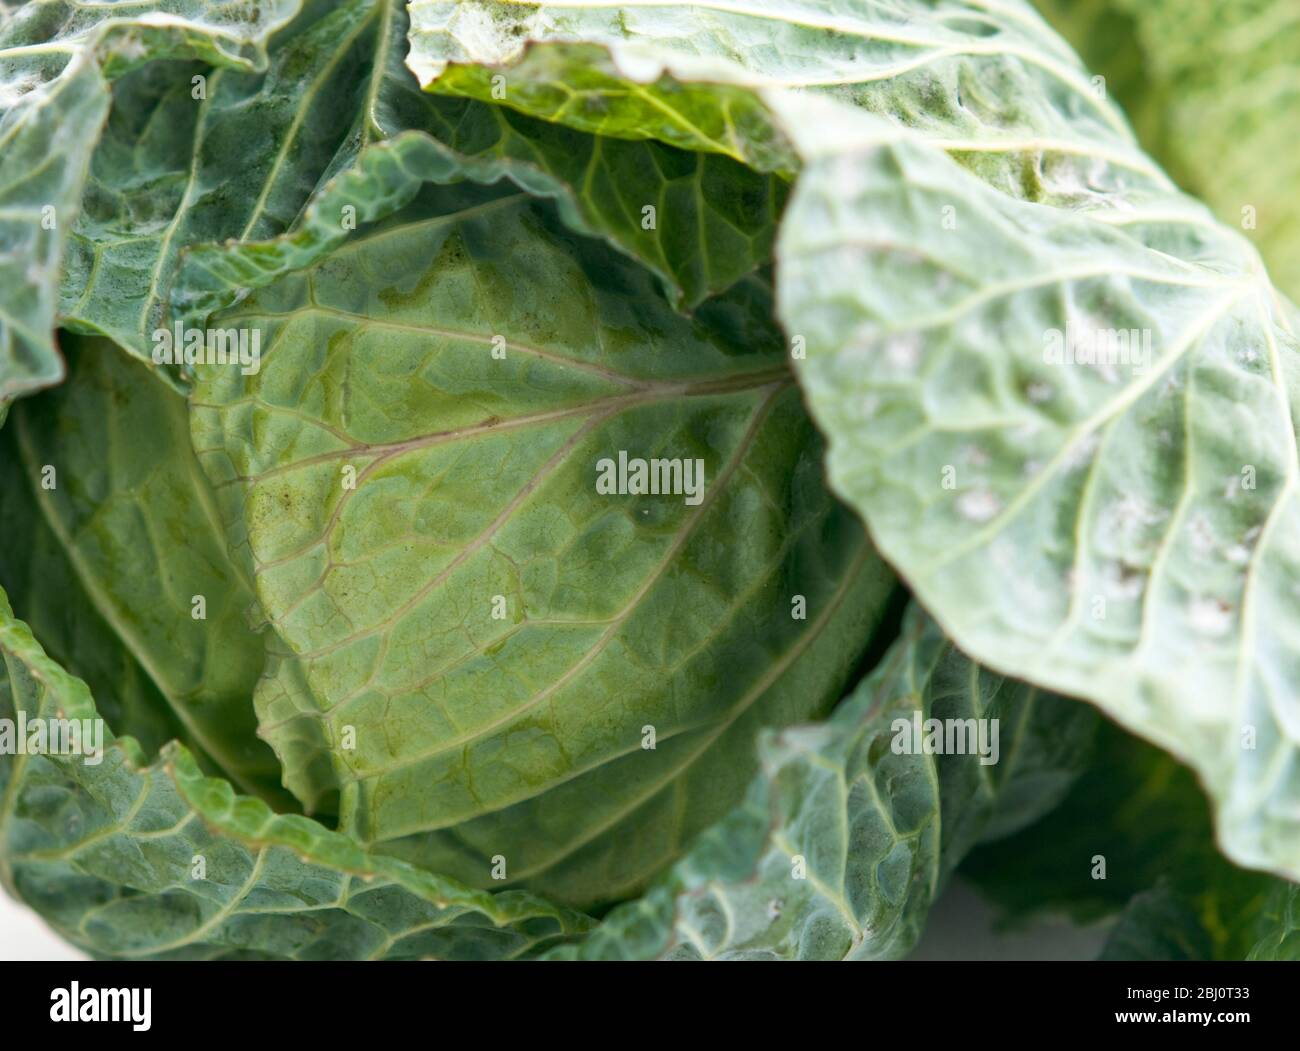 Large green whole cabbage closeup - Stock Photo